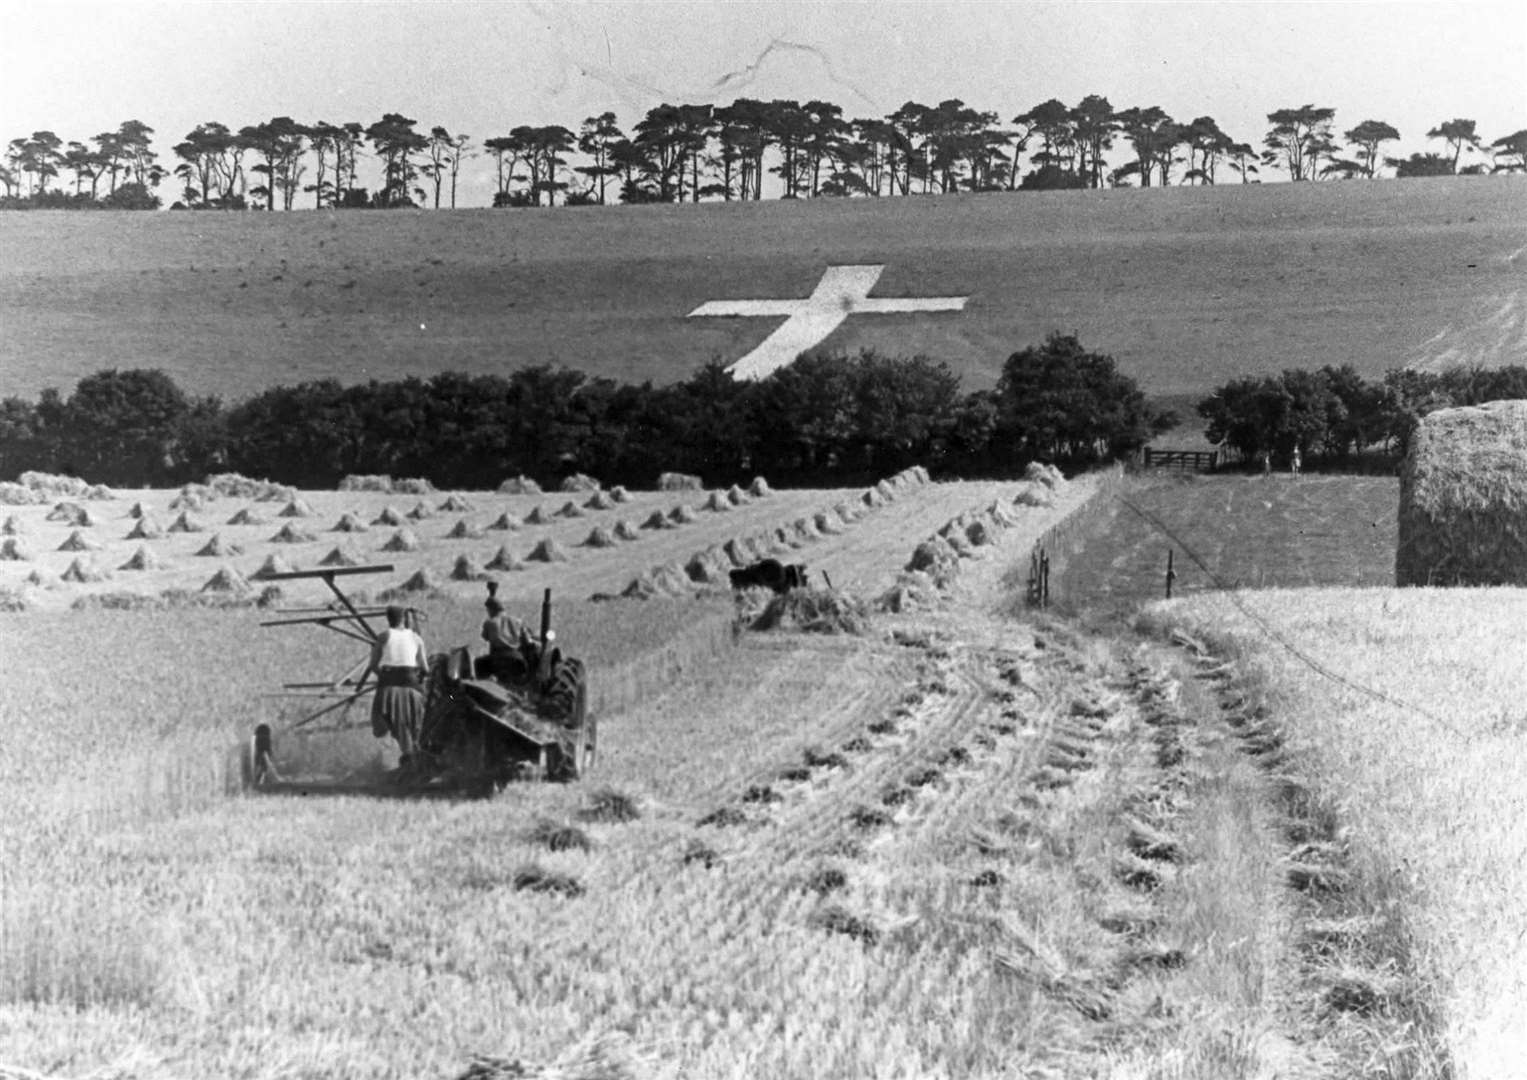 An archive photo looking across the fields to the Lenham Cross